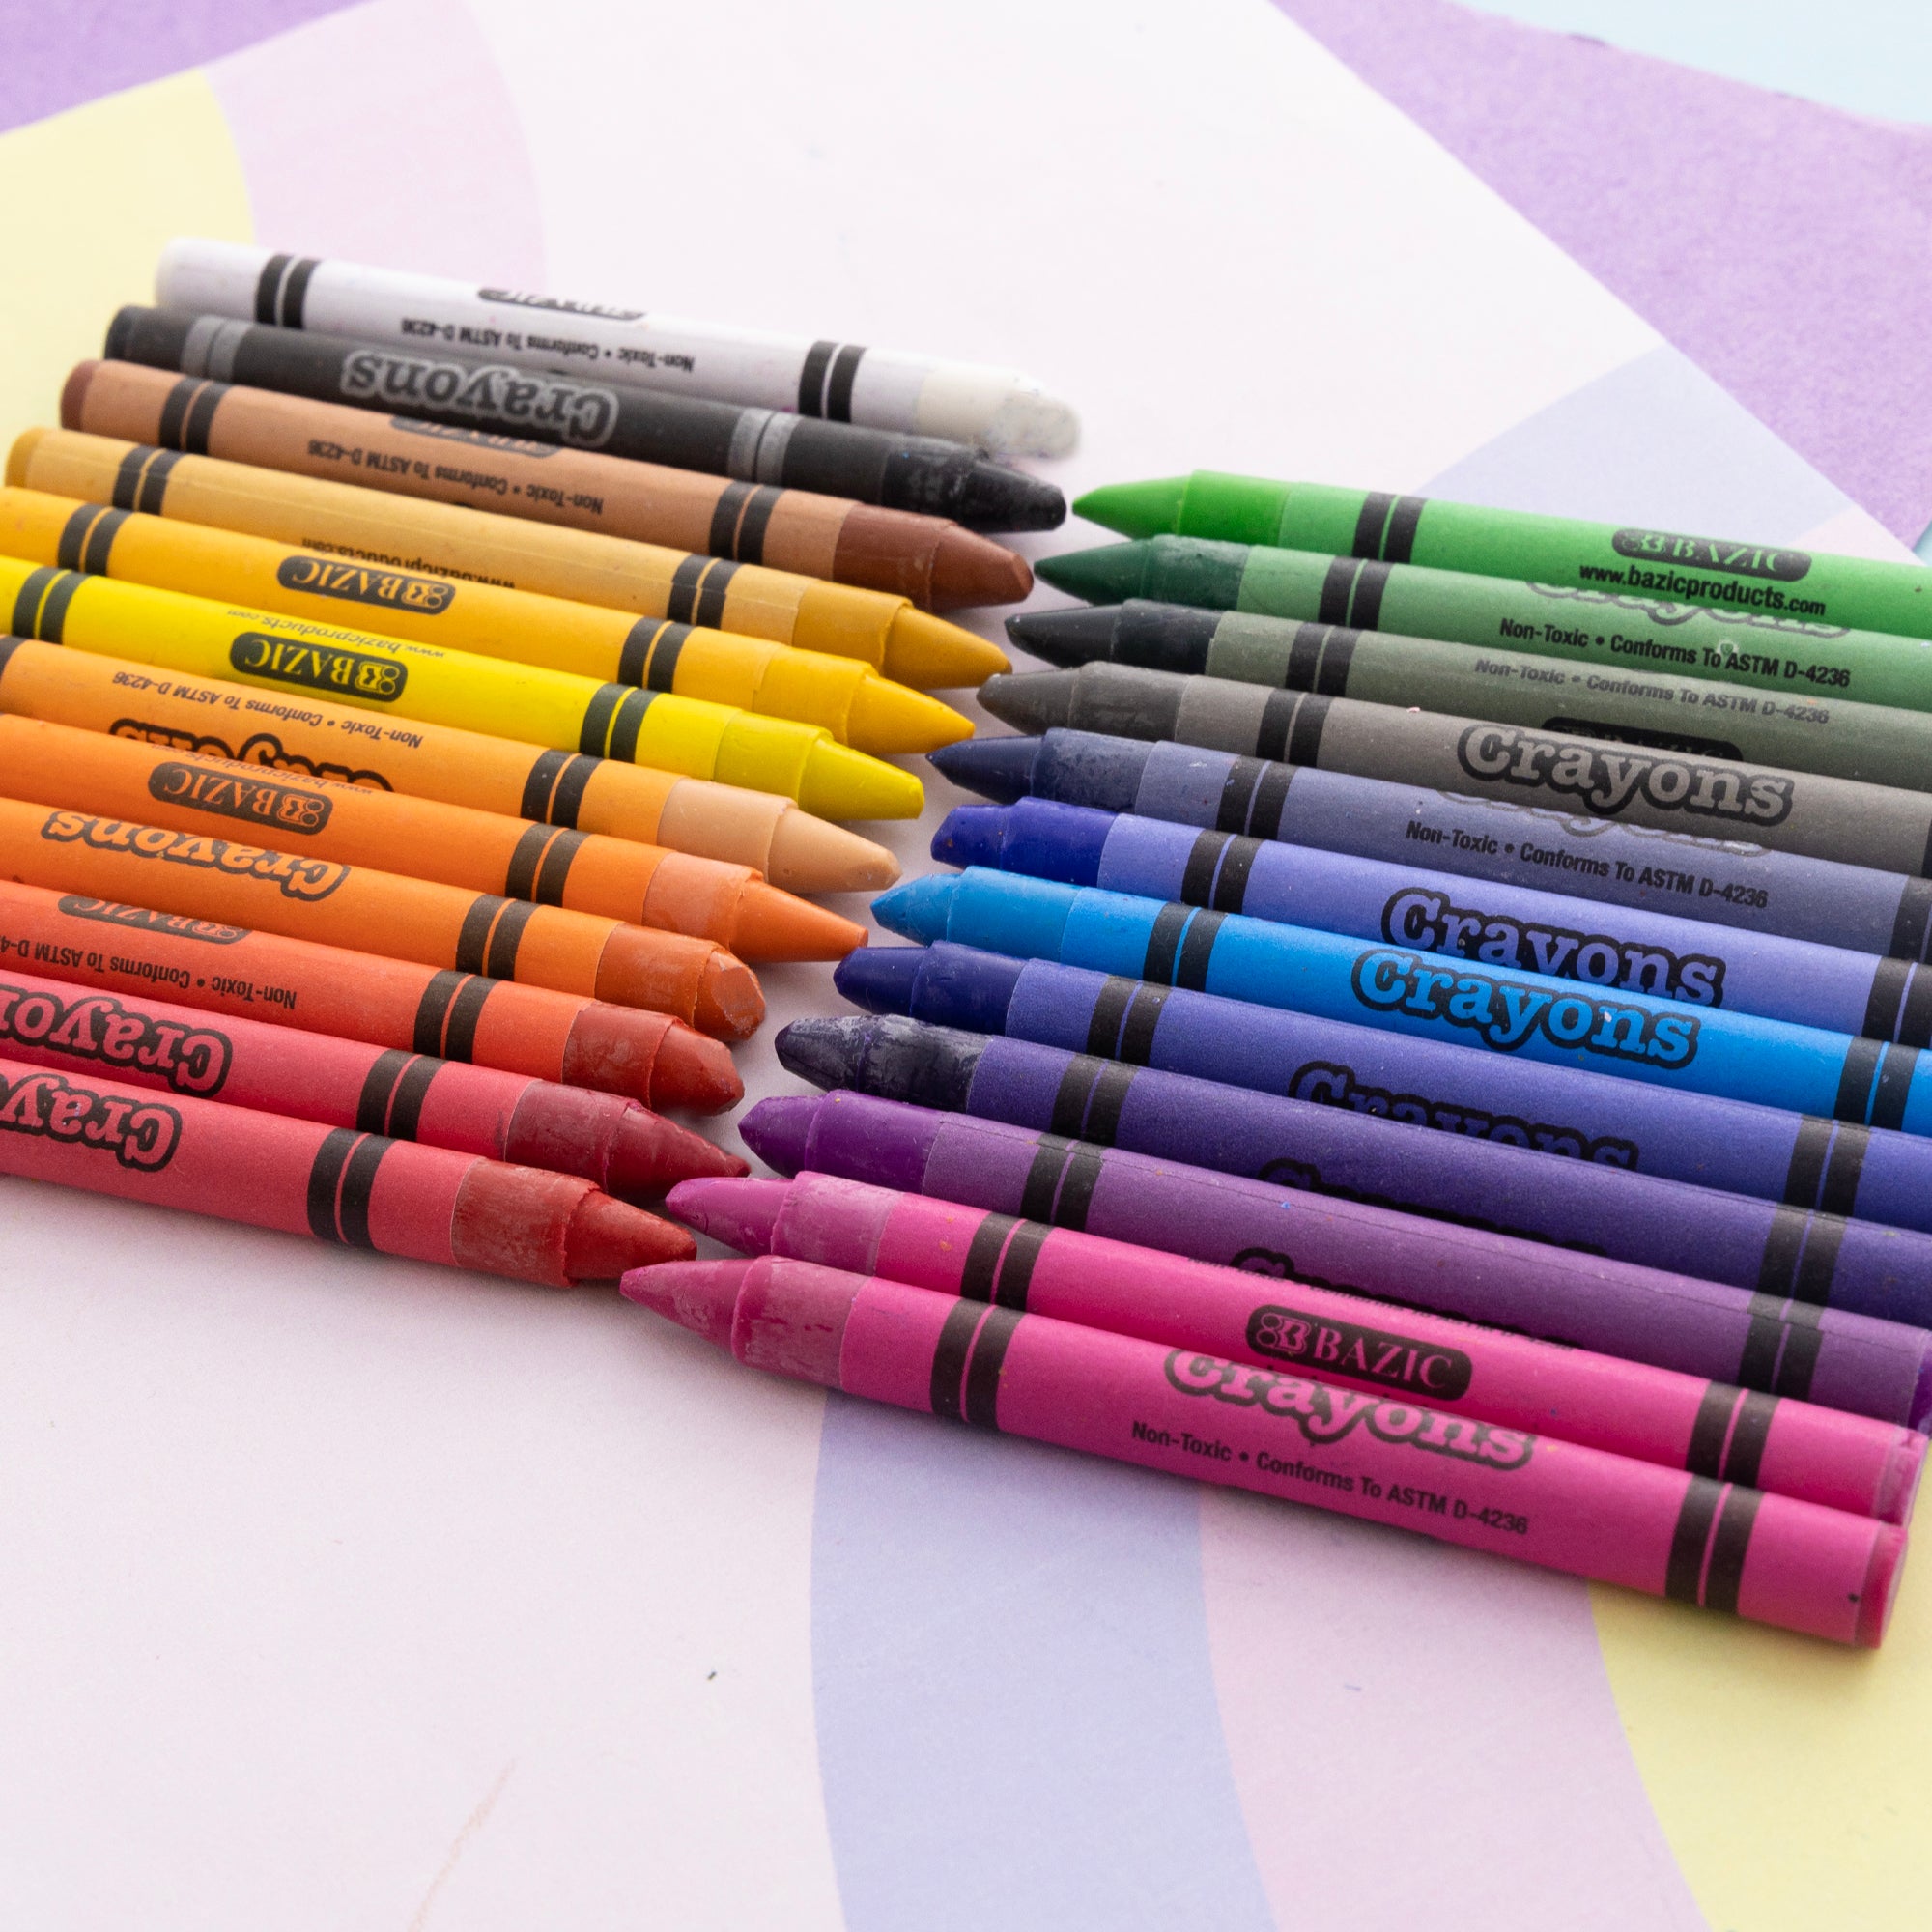 Standard Crayons 8 Count - Set of 5